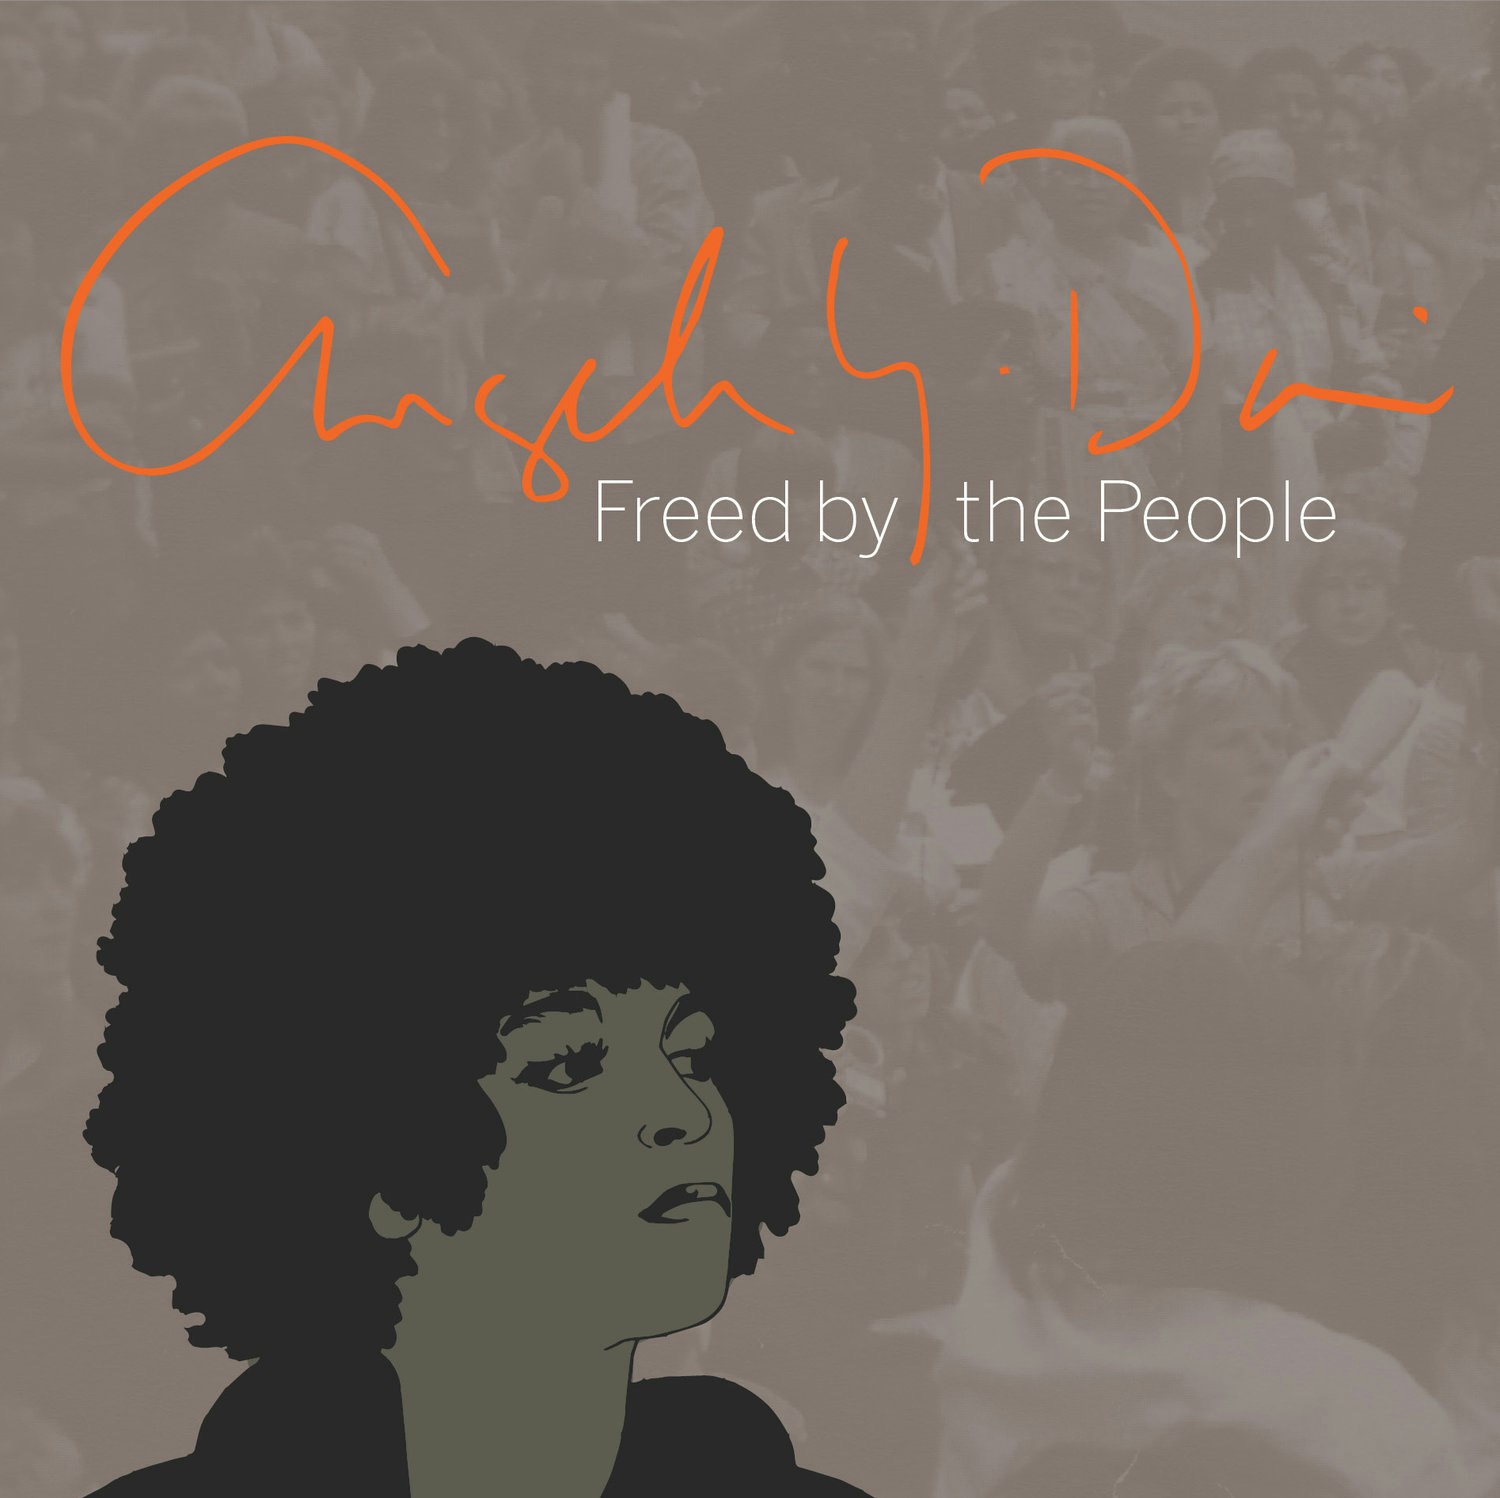 Angela Davis: Freed by the People